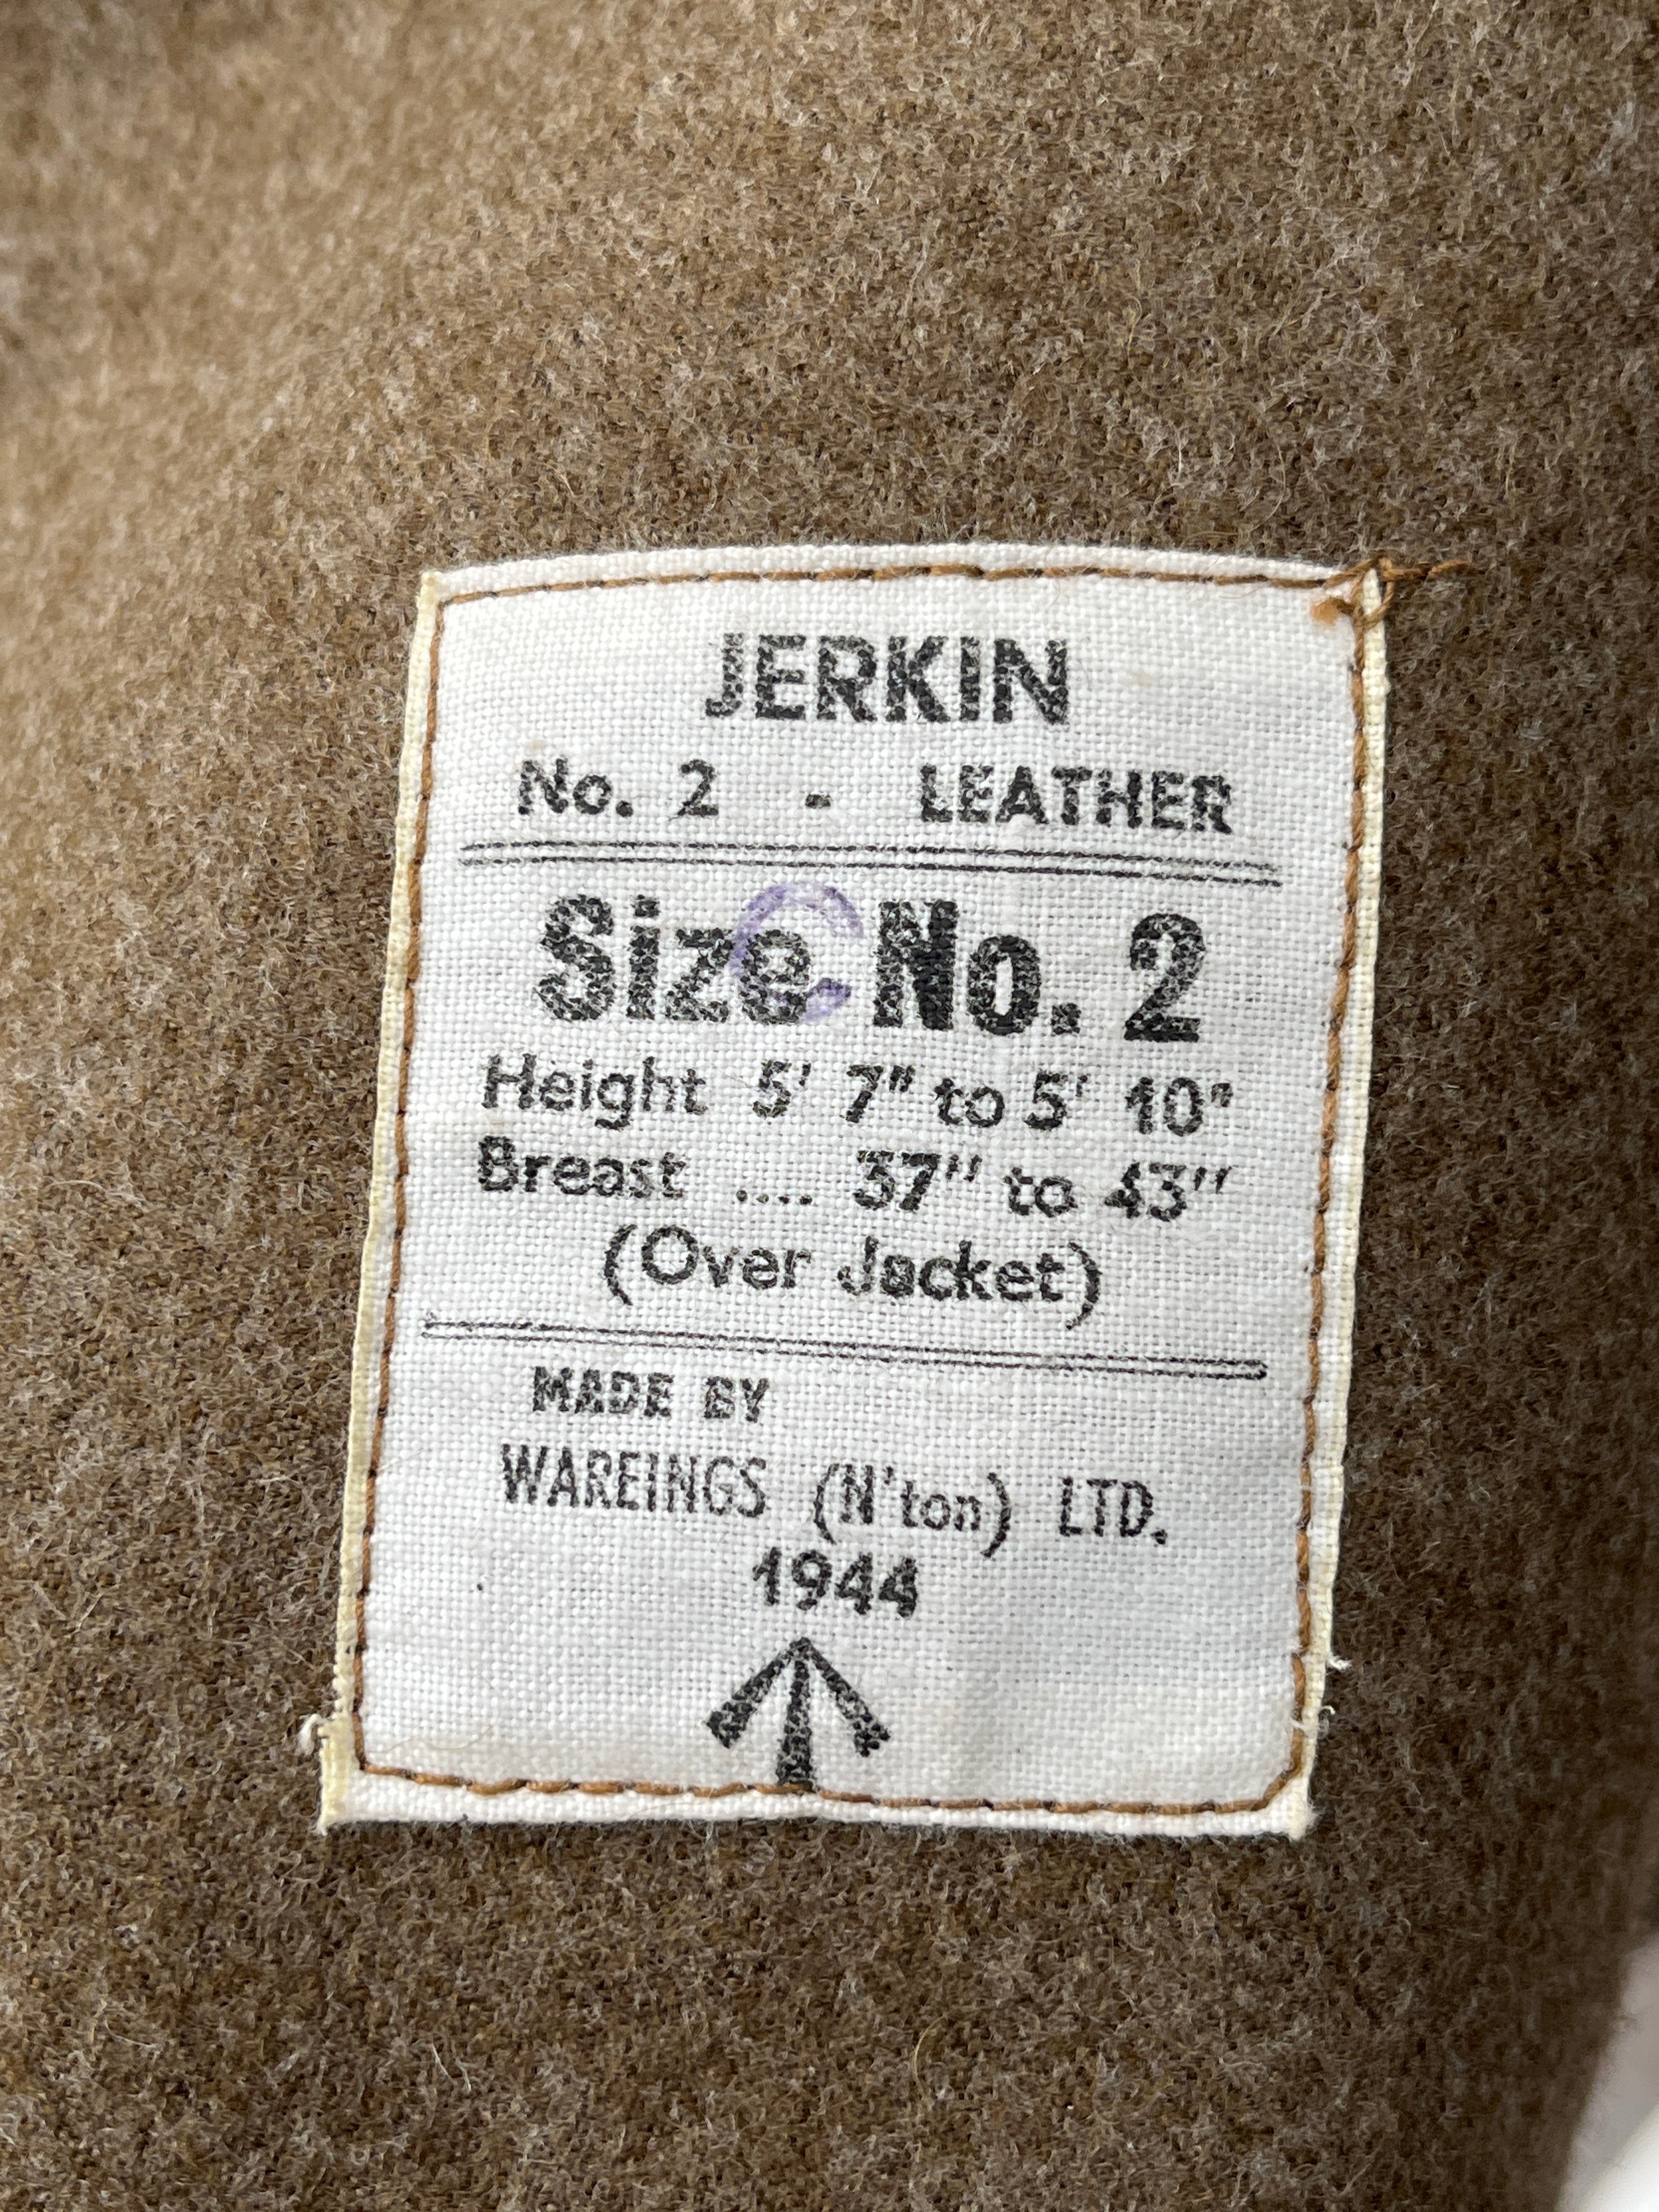 A WWII British leather jerkin, dated 1944, size no. 2 - Image 2 of 4